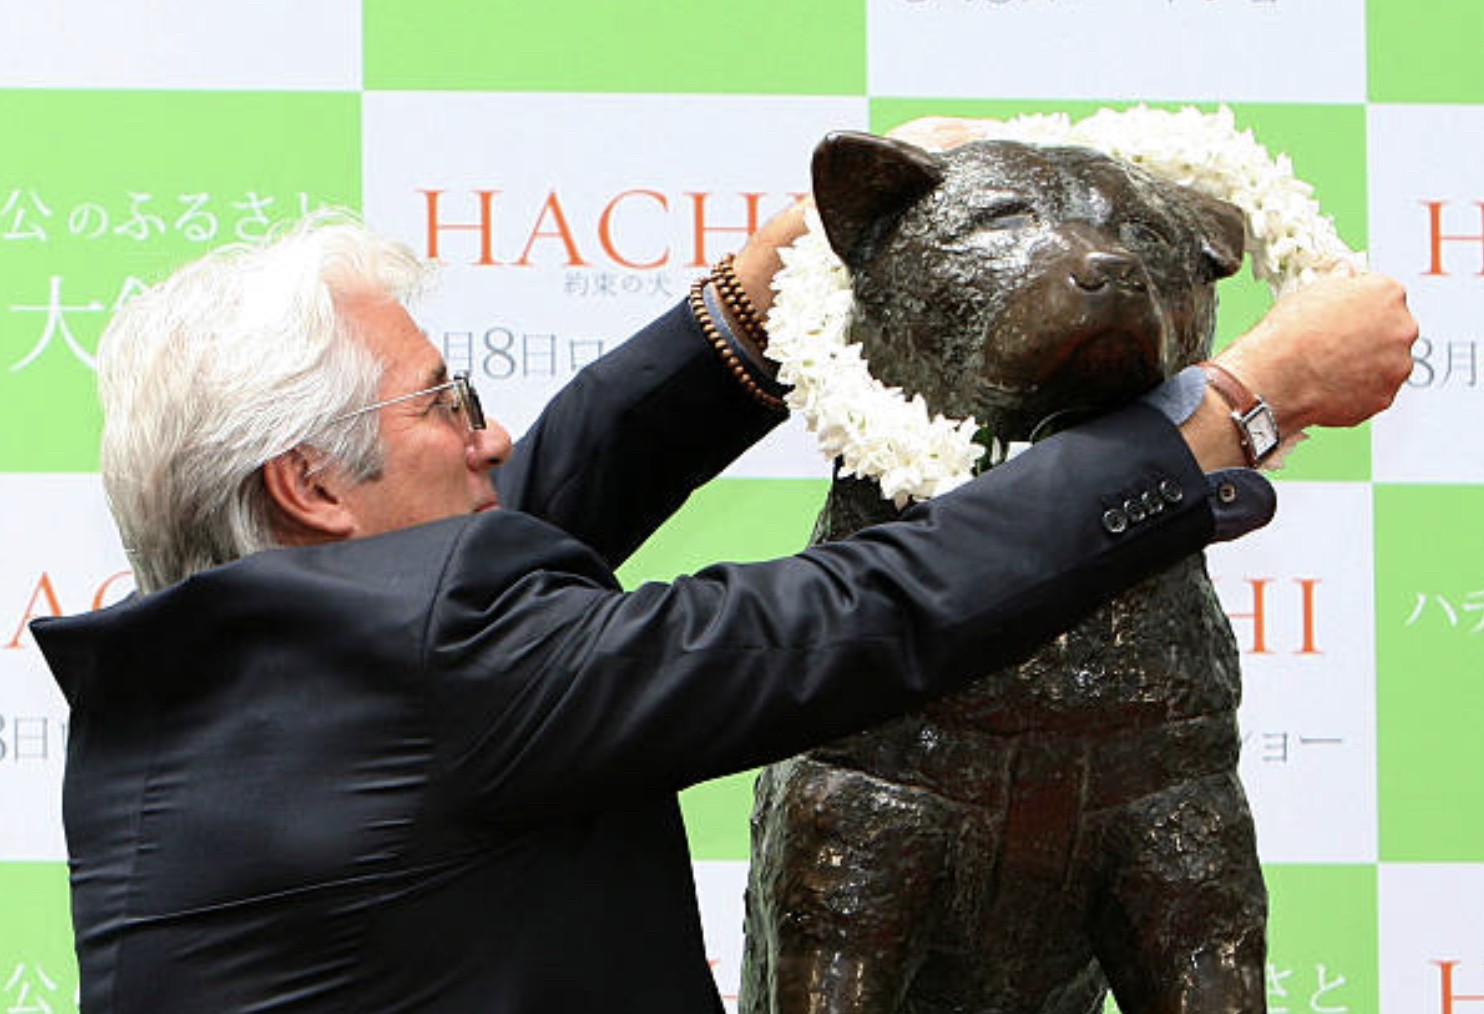 Richard Gere places flowers on Hachi’s statue, ceremony for premiere of Hachi: A Dog’s Tale